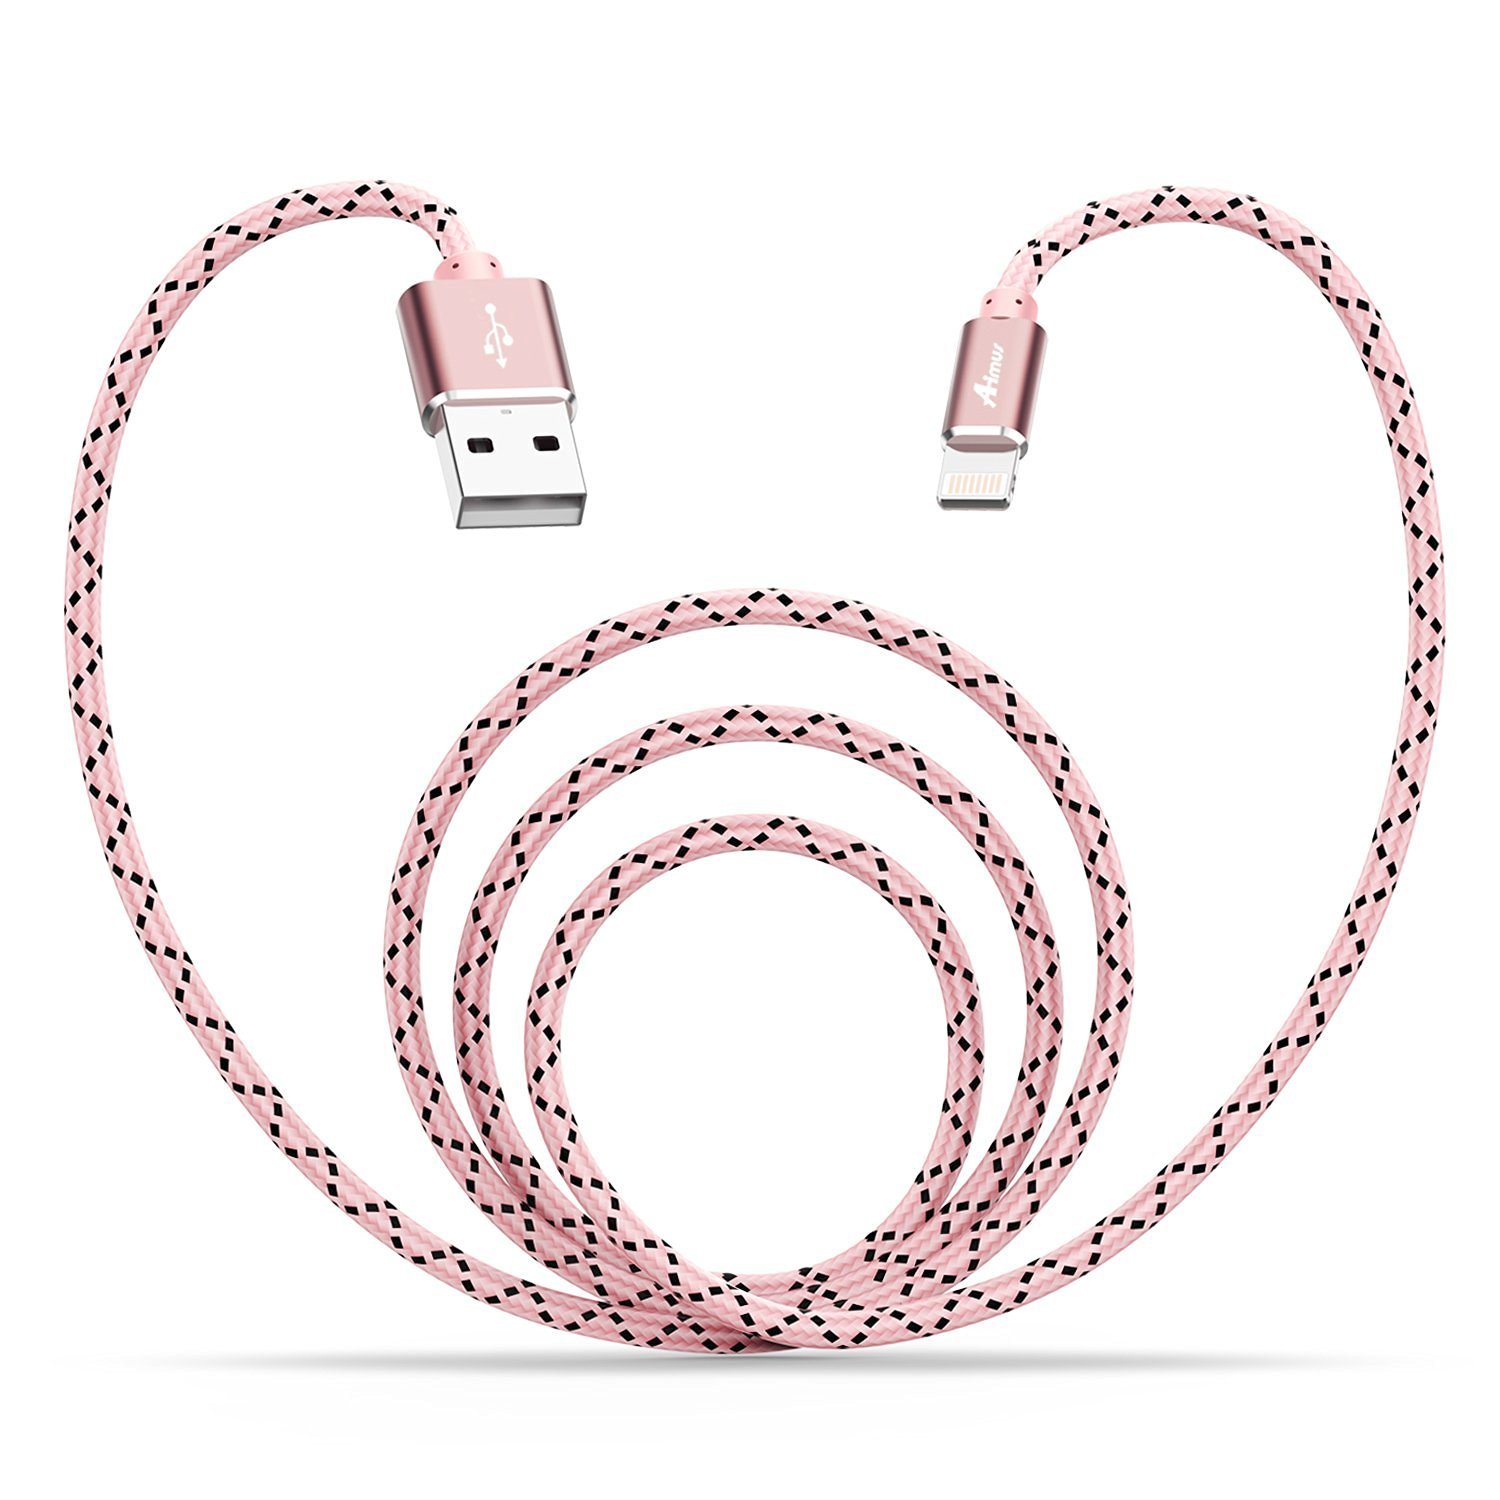 Aimus rose gold lightning cable